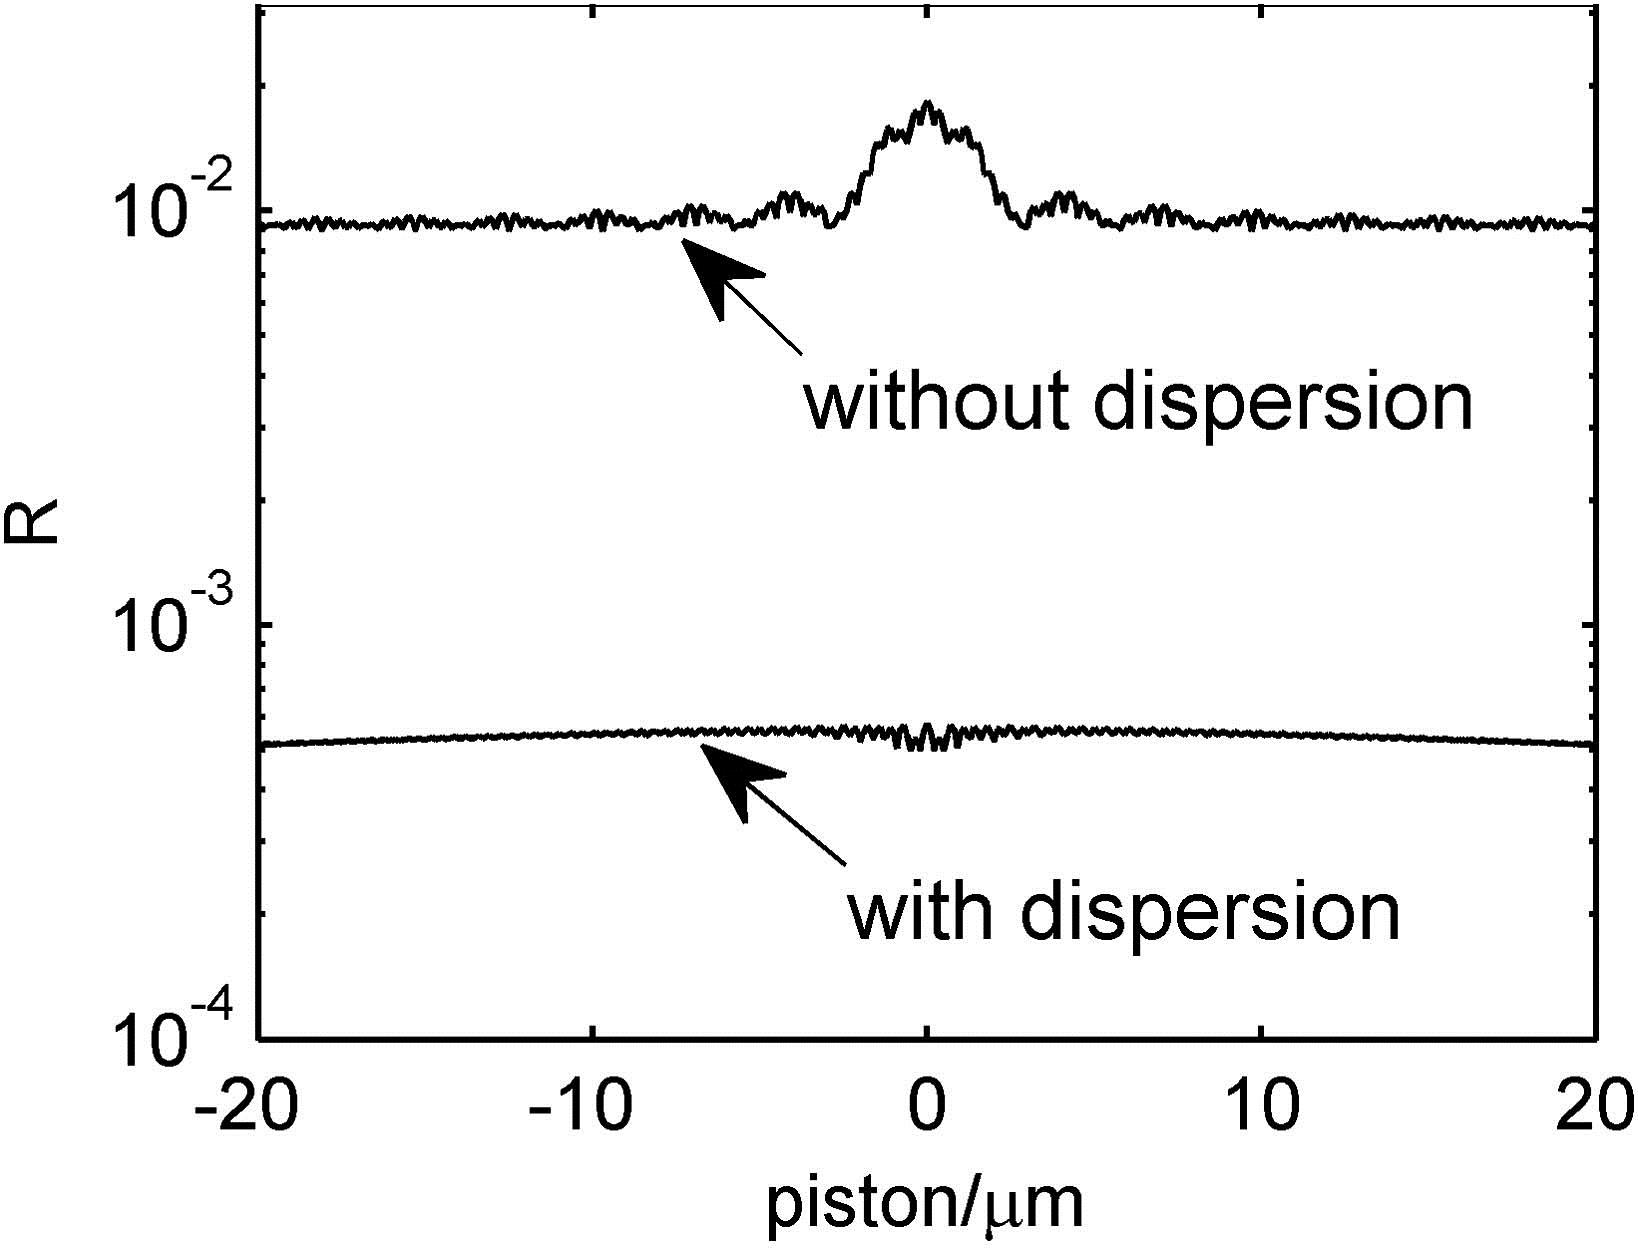 Relation between R and the piston error for cases with and without dispersion.